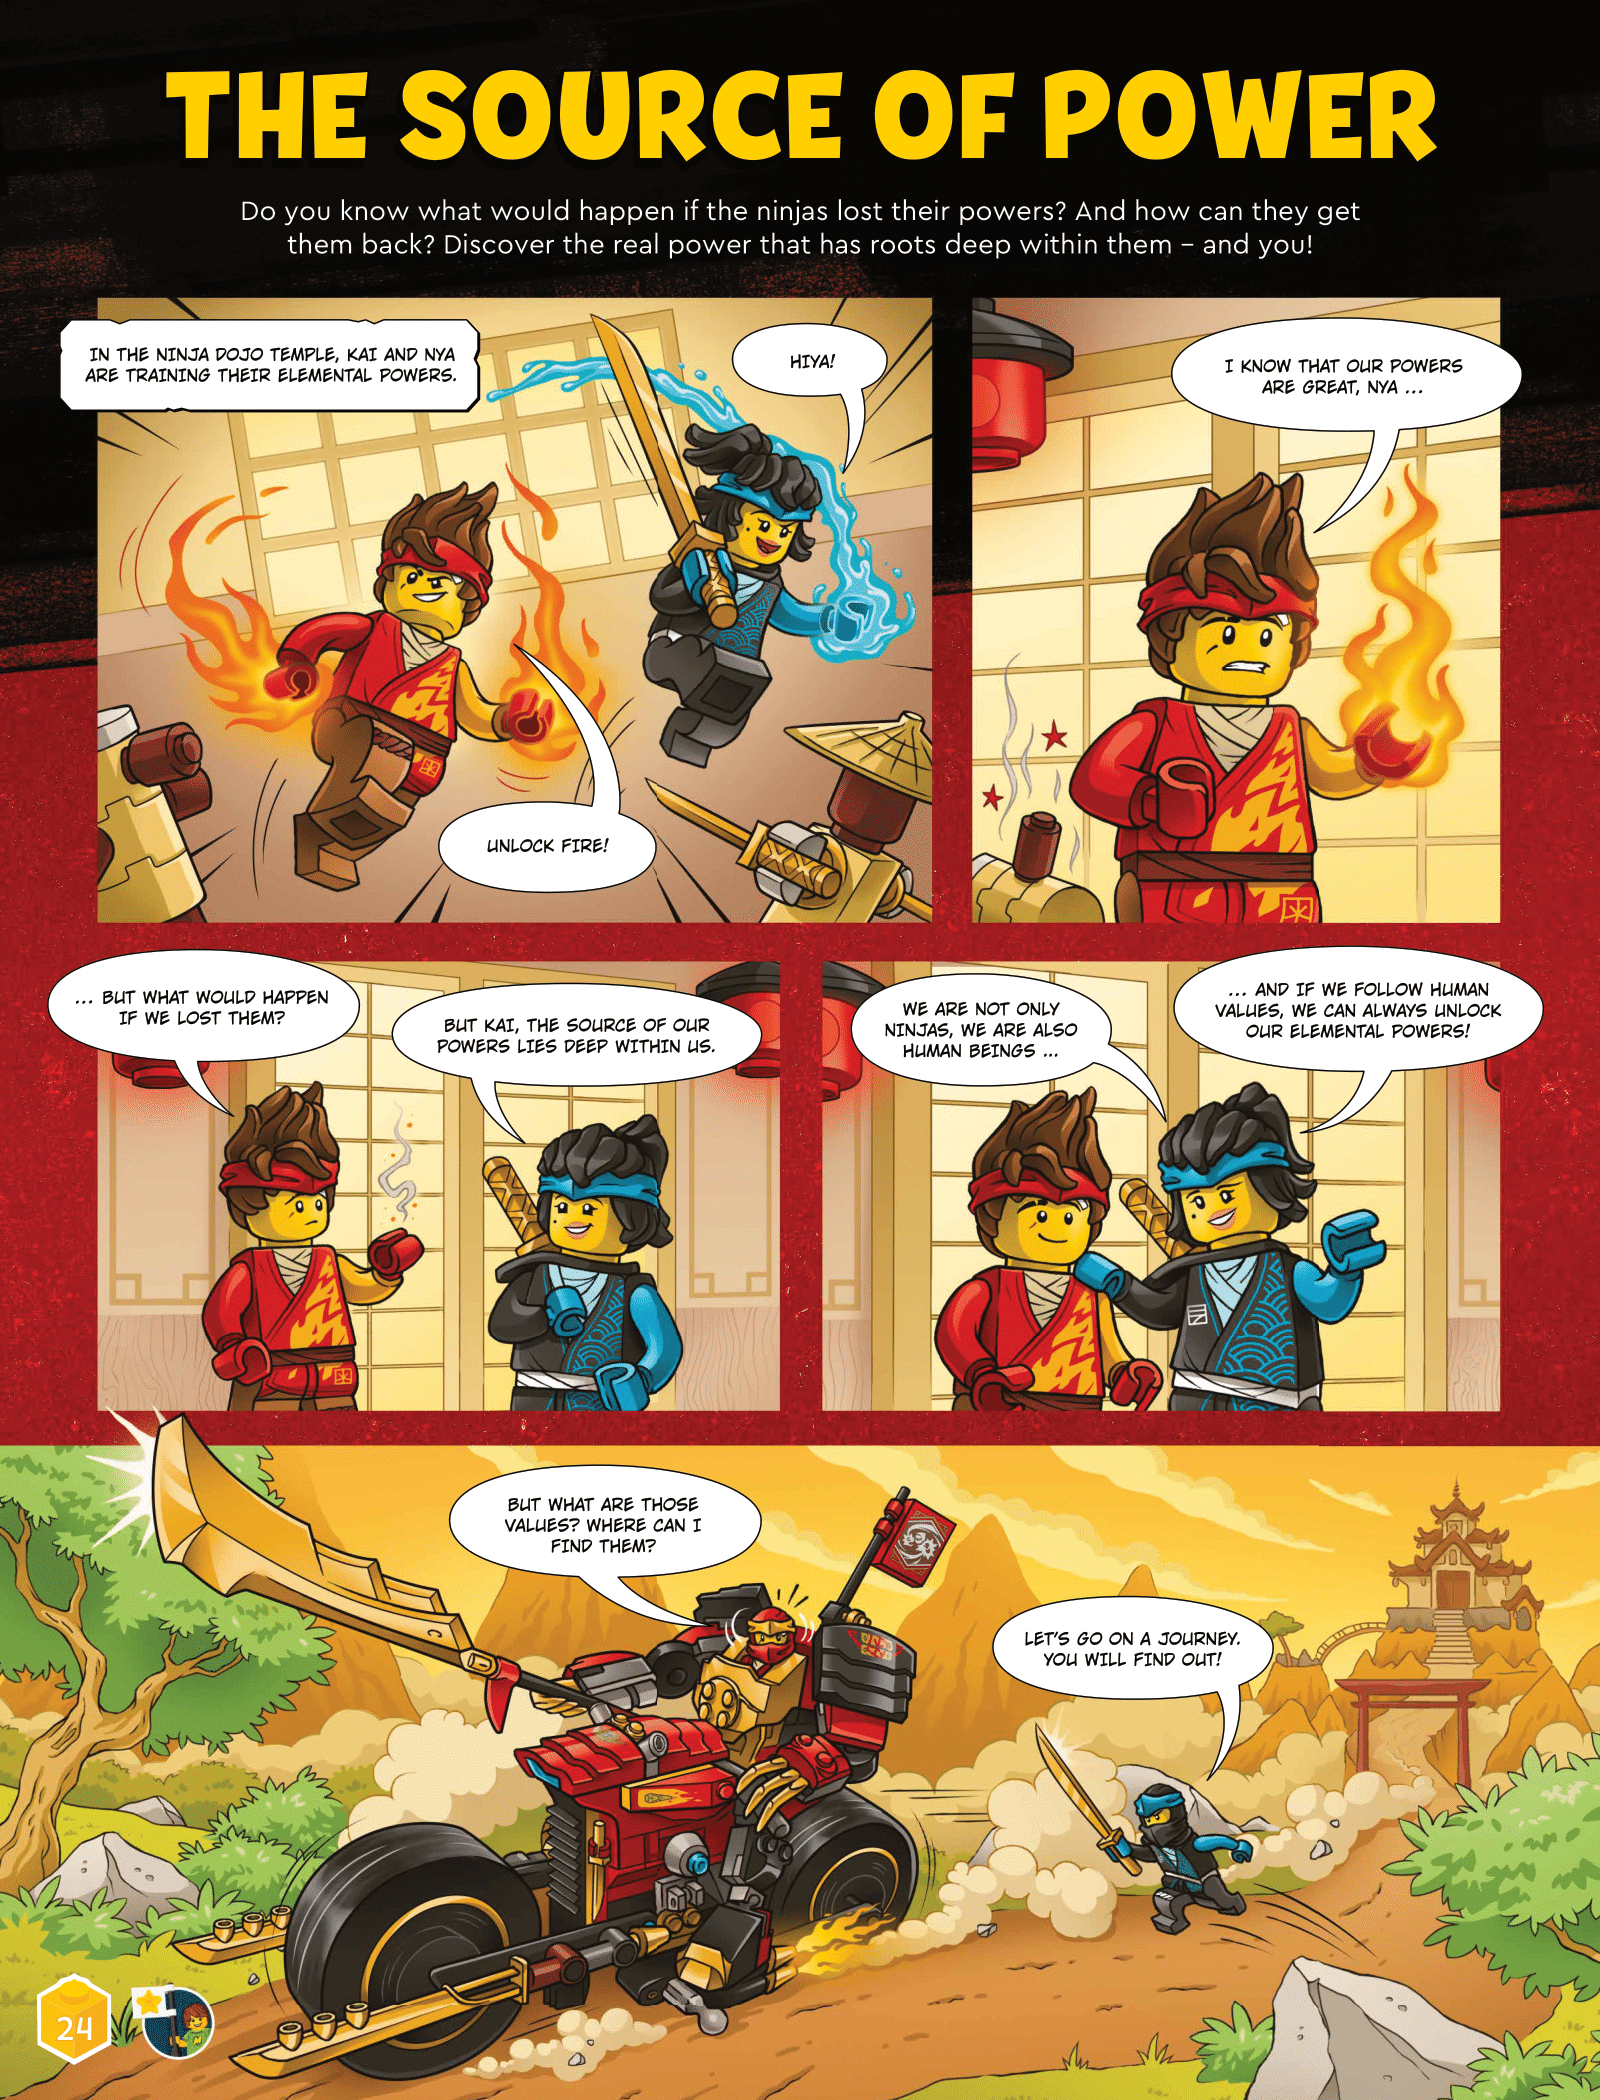 https://static.wikia.nocookie.net/ninjago/images/8/8d/The_Source_of_Power.png/revision/latest?cb=20230111081432